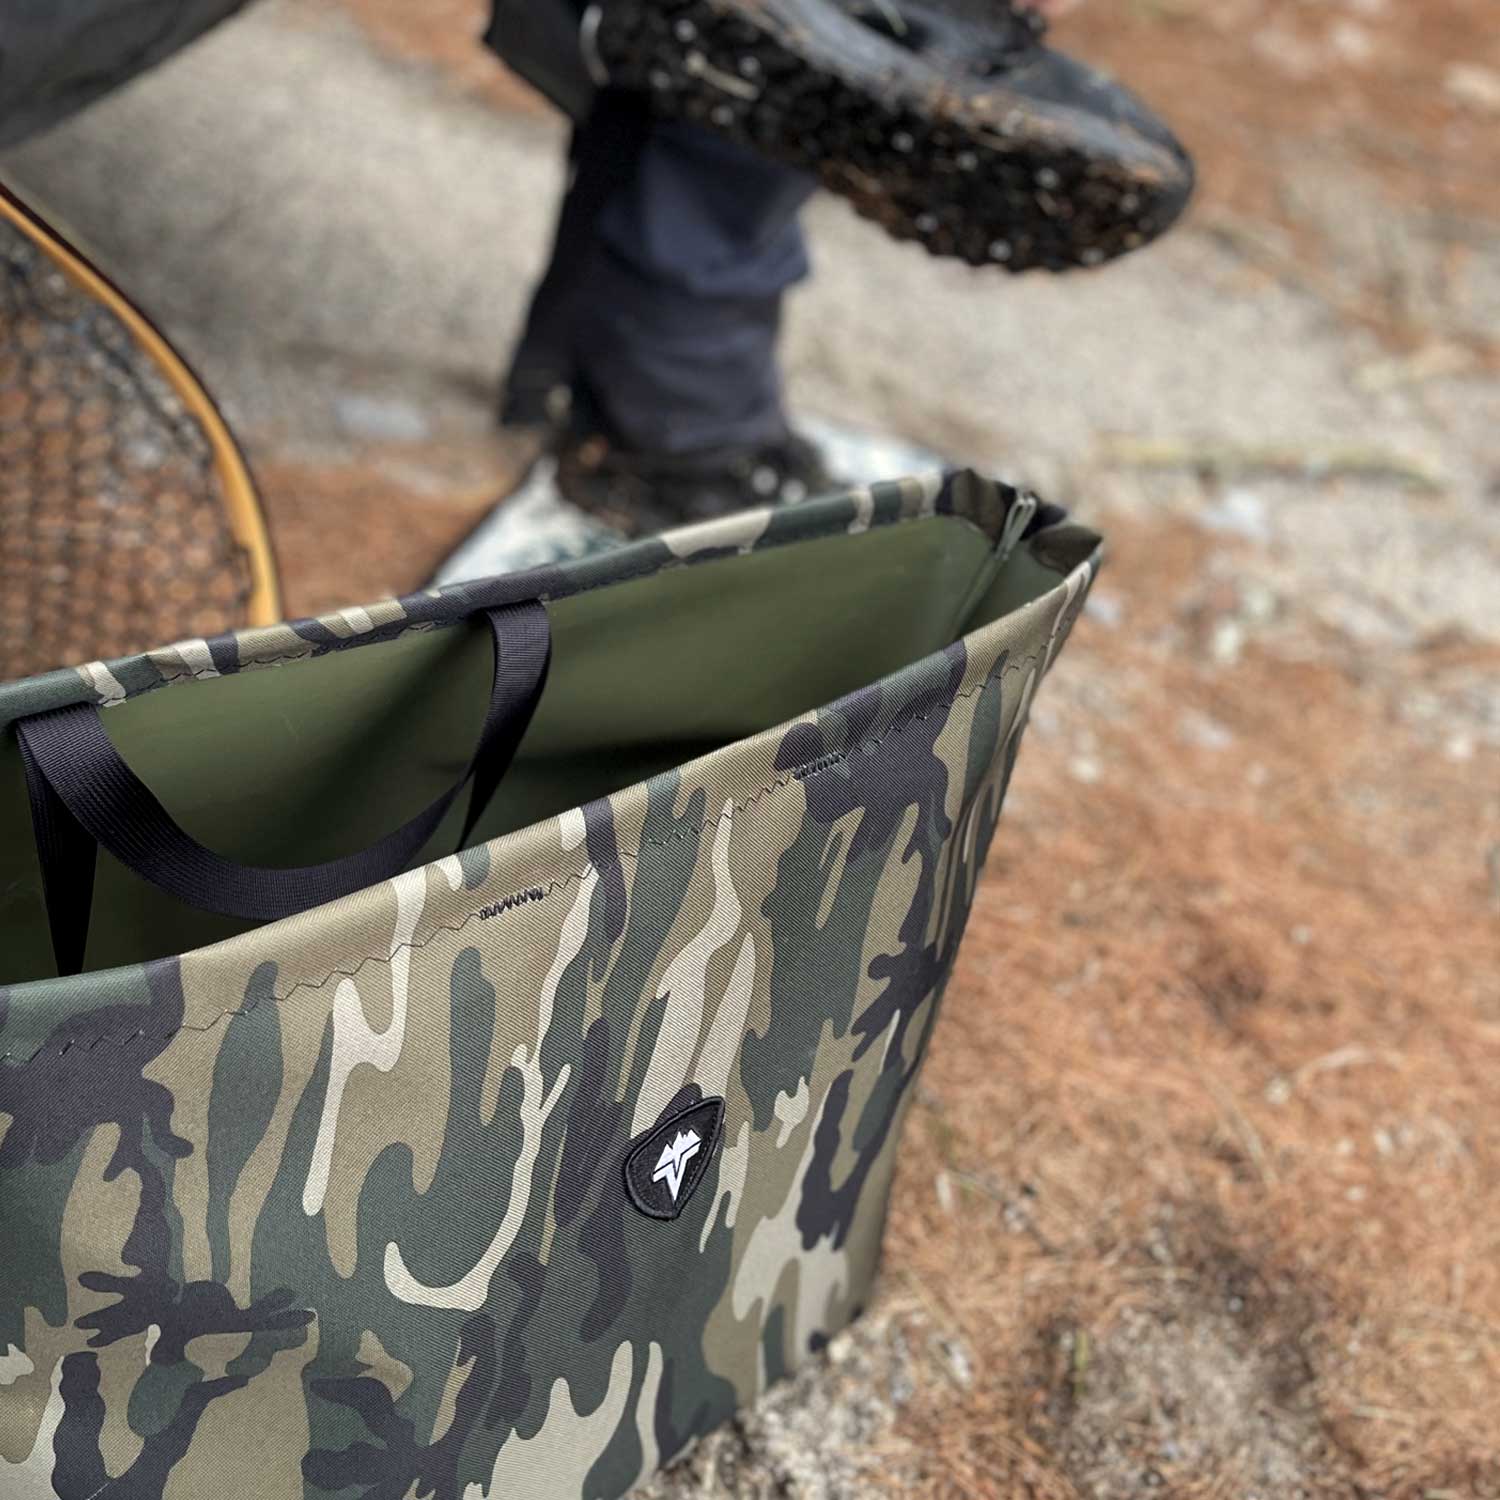 Vedavoo Waterproof Wader Bag is a great fly fishing bag and gift for any angler.